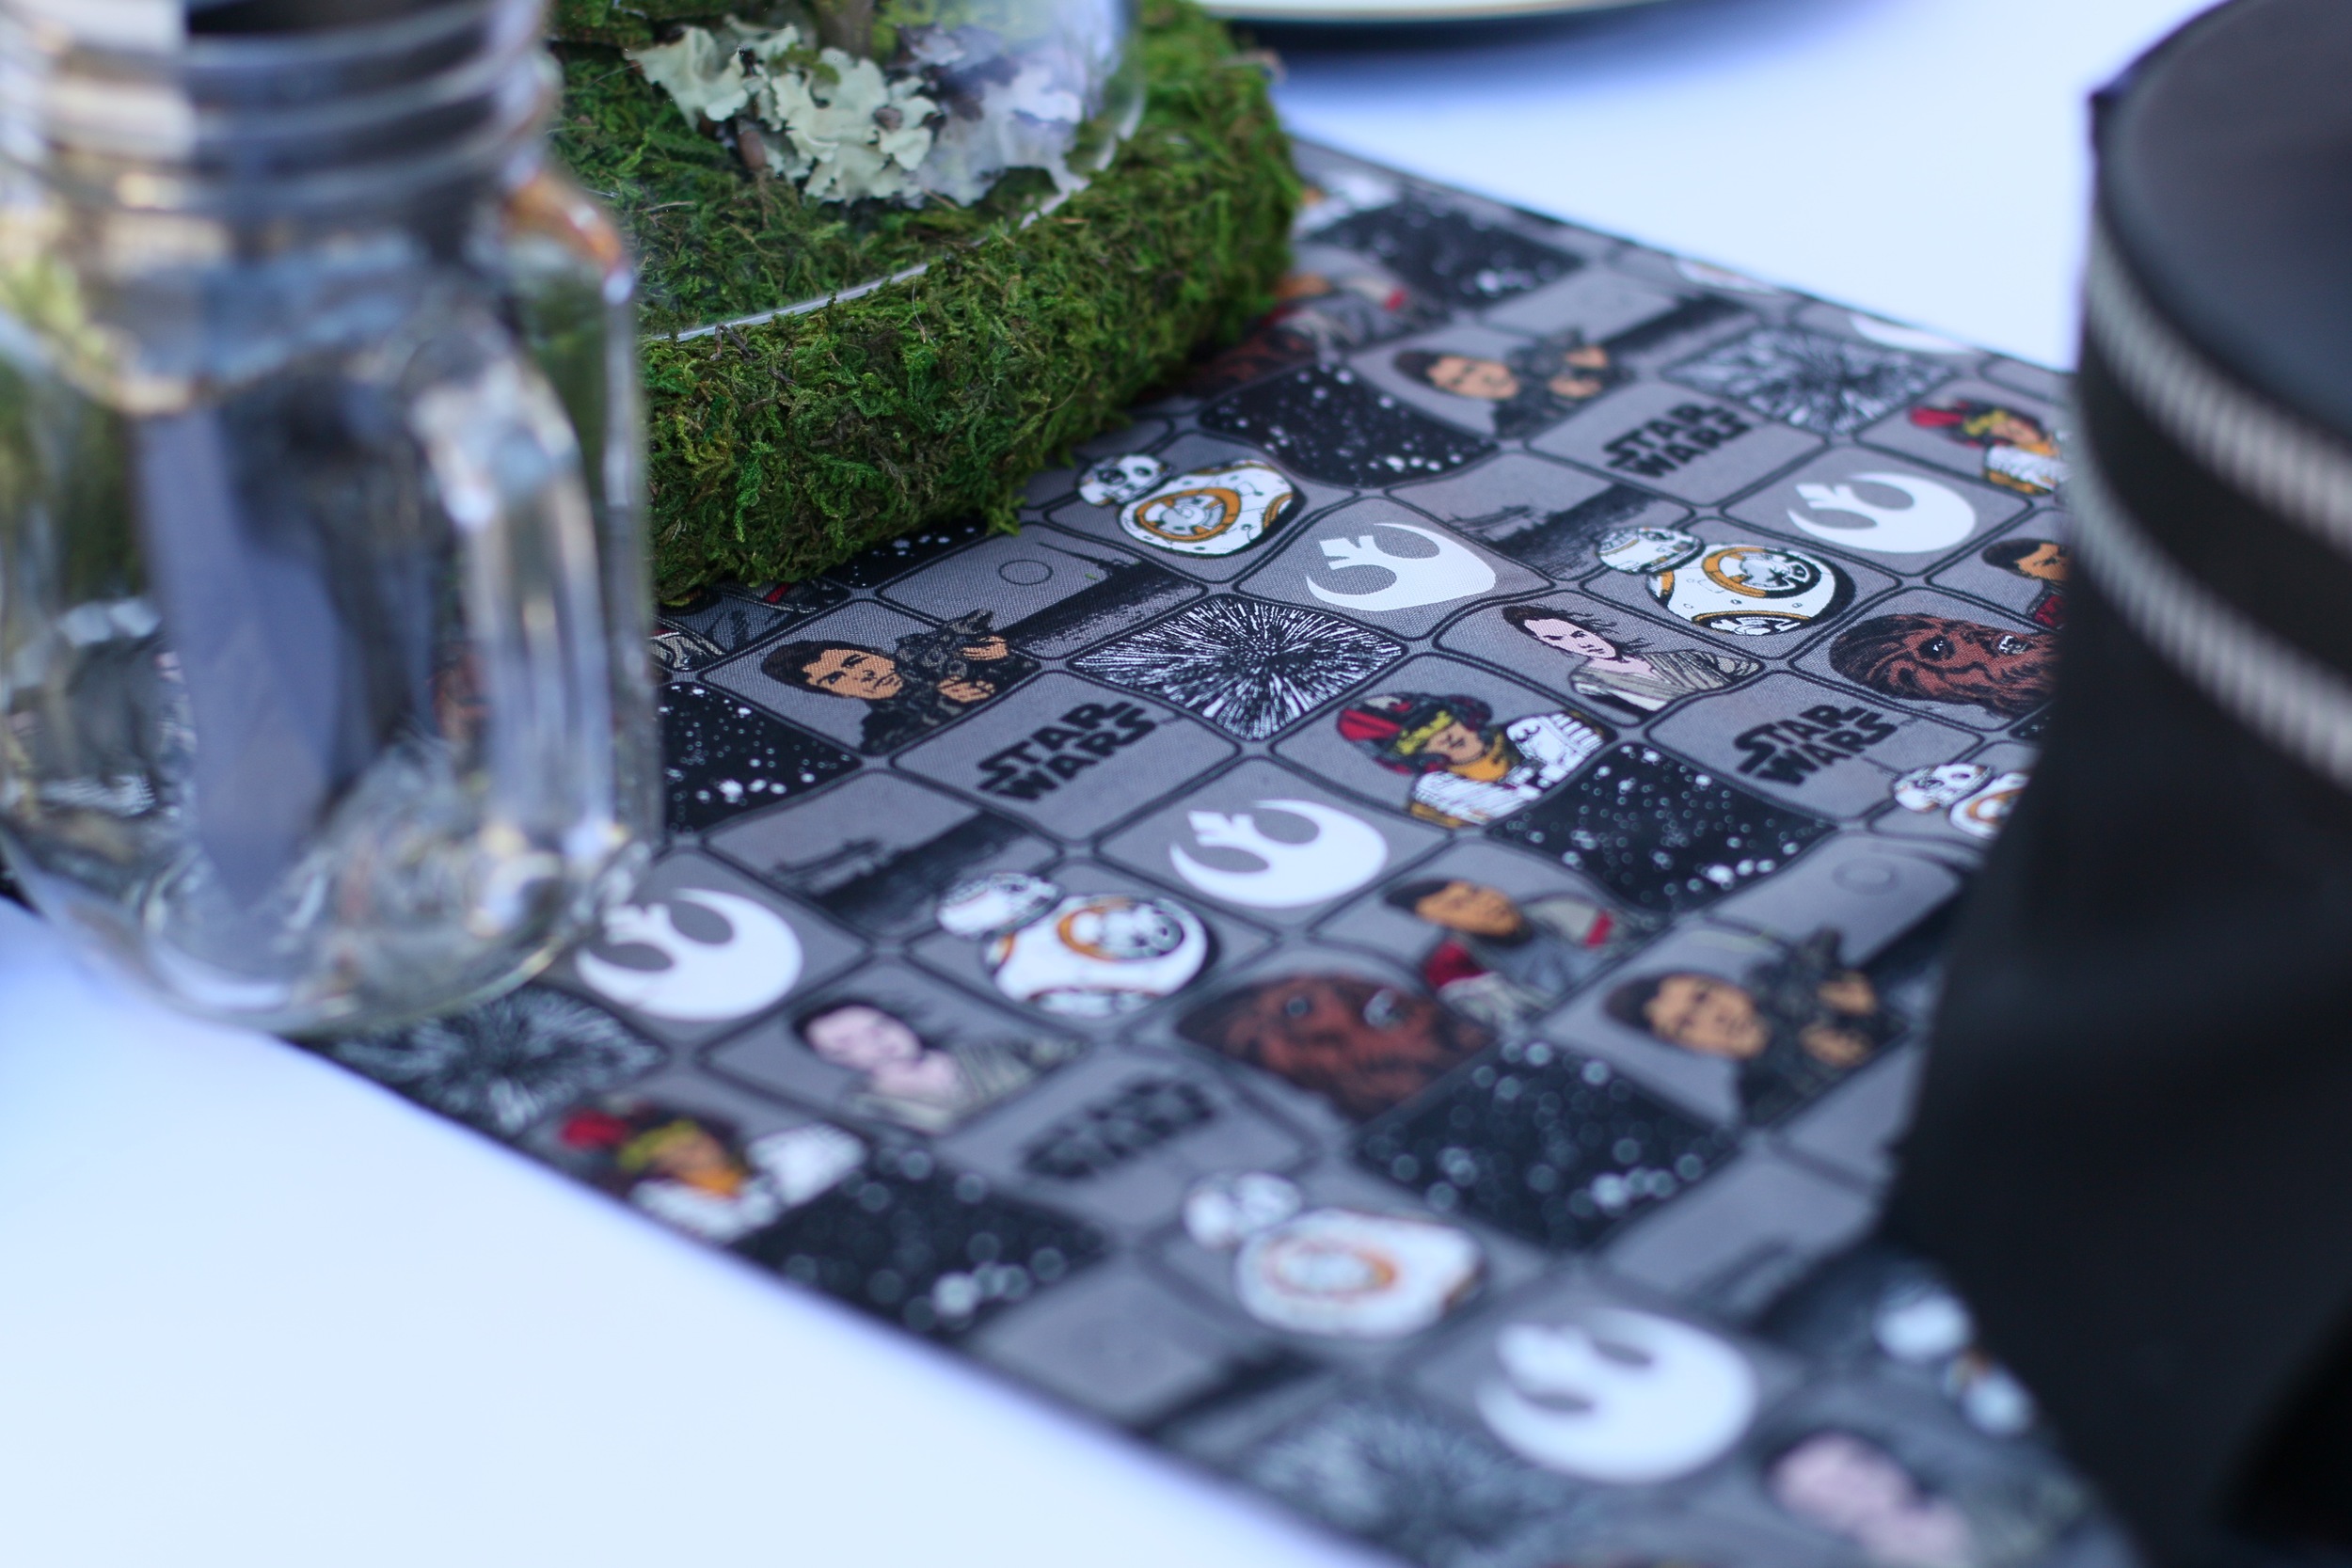 Copy of This Star Wars party rental collection will awaken the force in all party guests! Star Wars action figures, signage, linens, and centerpieces are all included to make your party planning si...